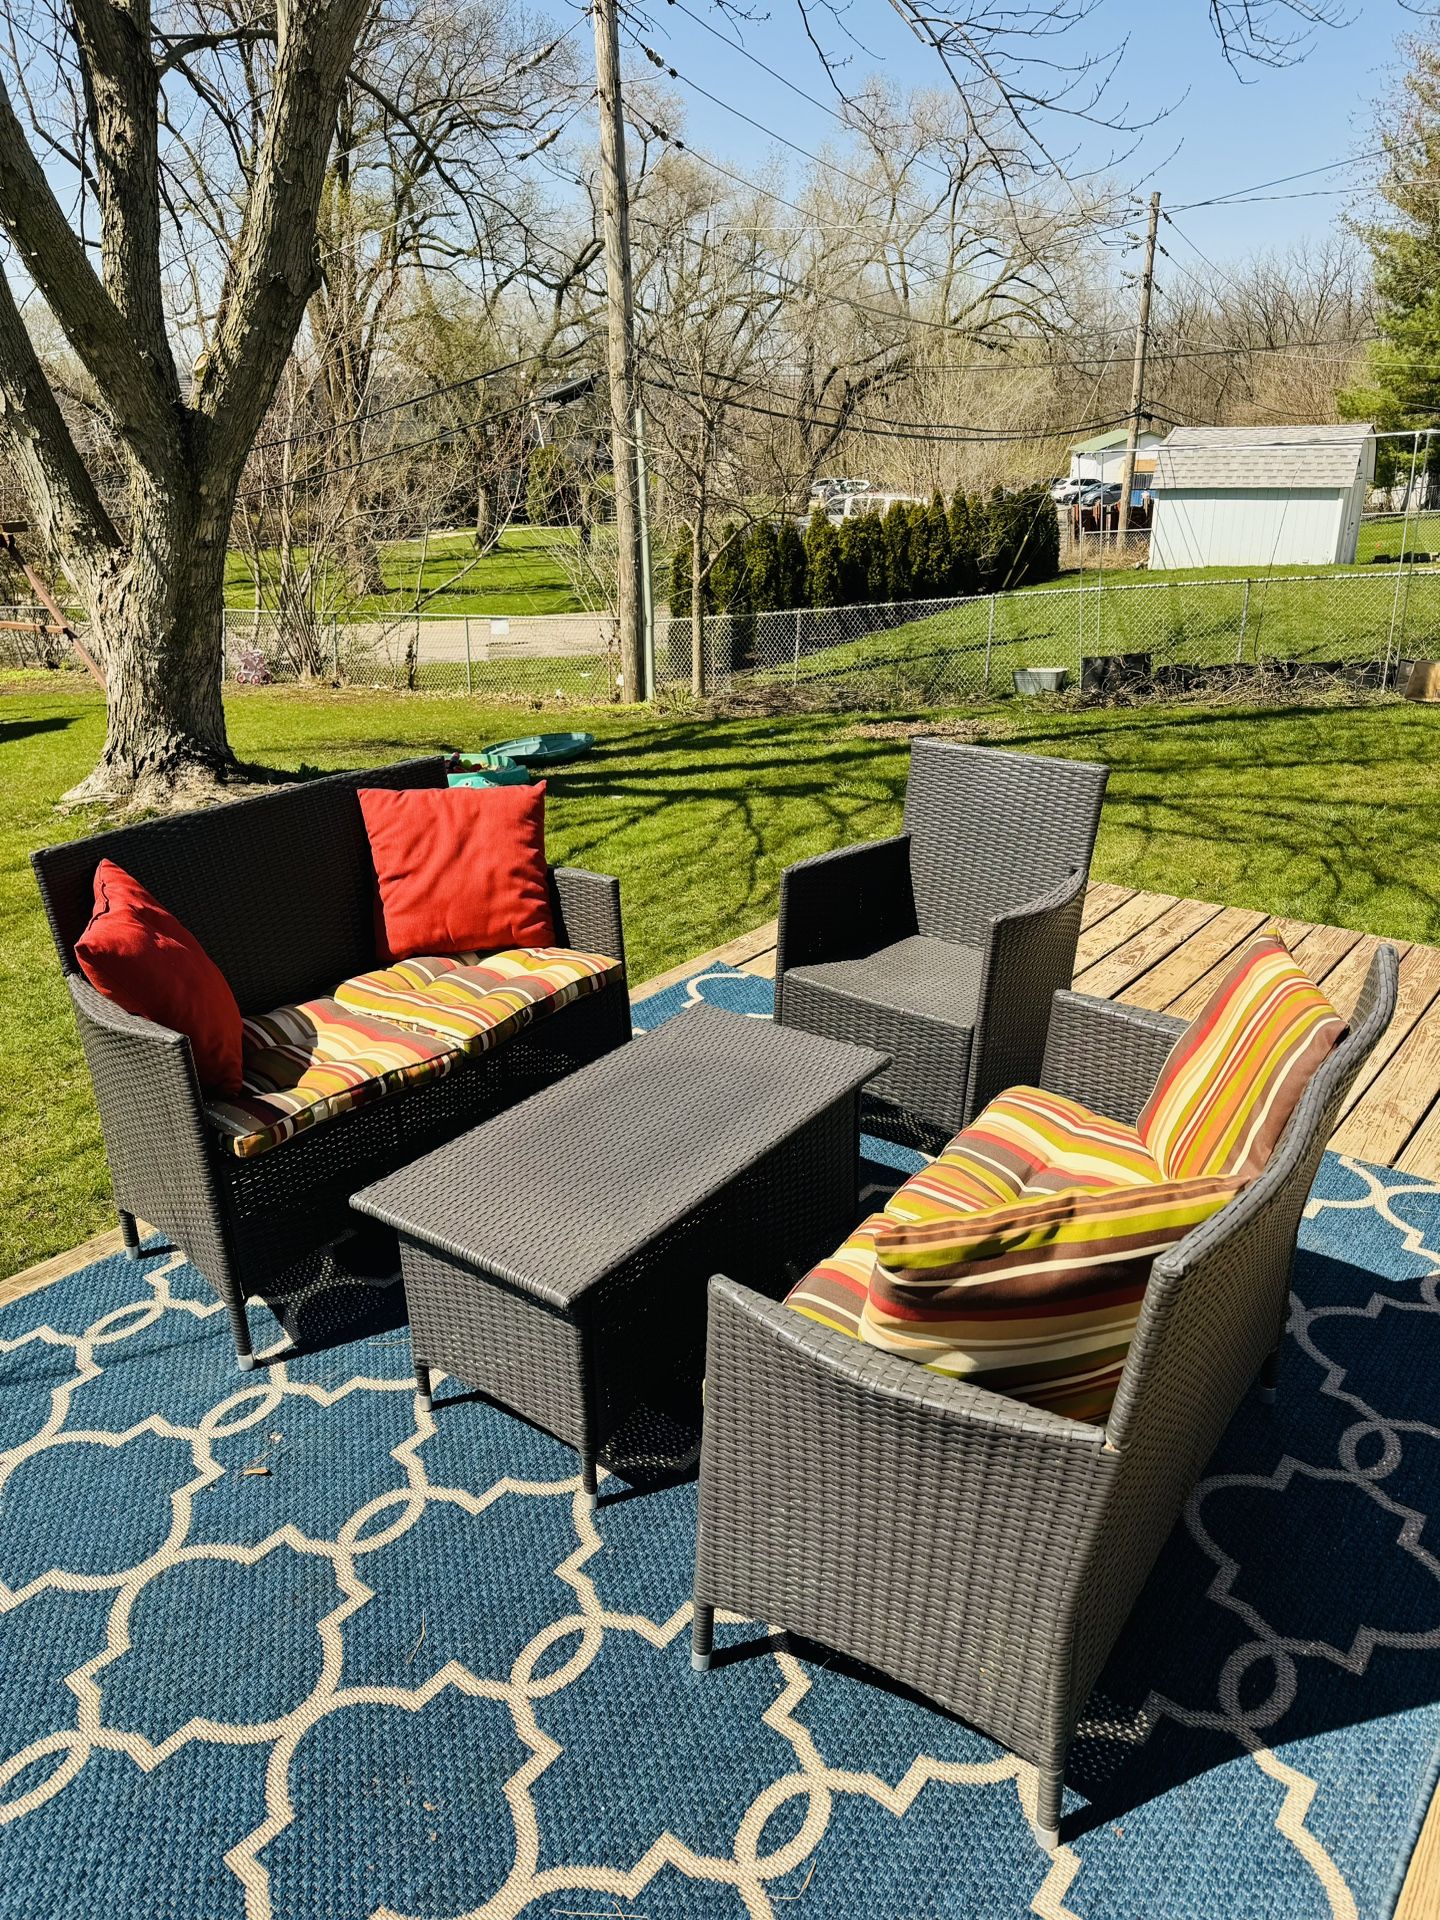 Patio Furniture - Outdoors Furniture - Patio Set - Wicker - Loveseat - Pillows - Table - 4 Piece